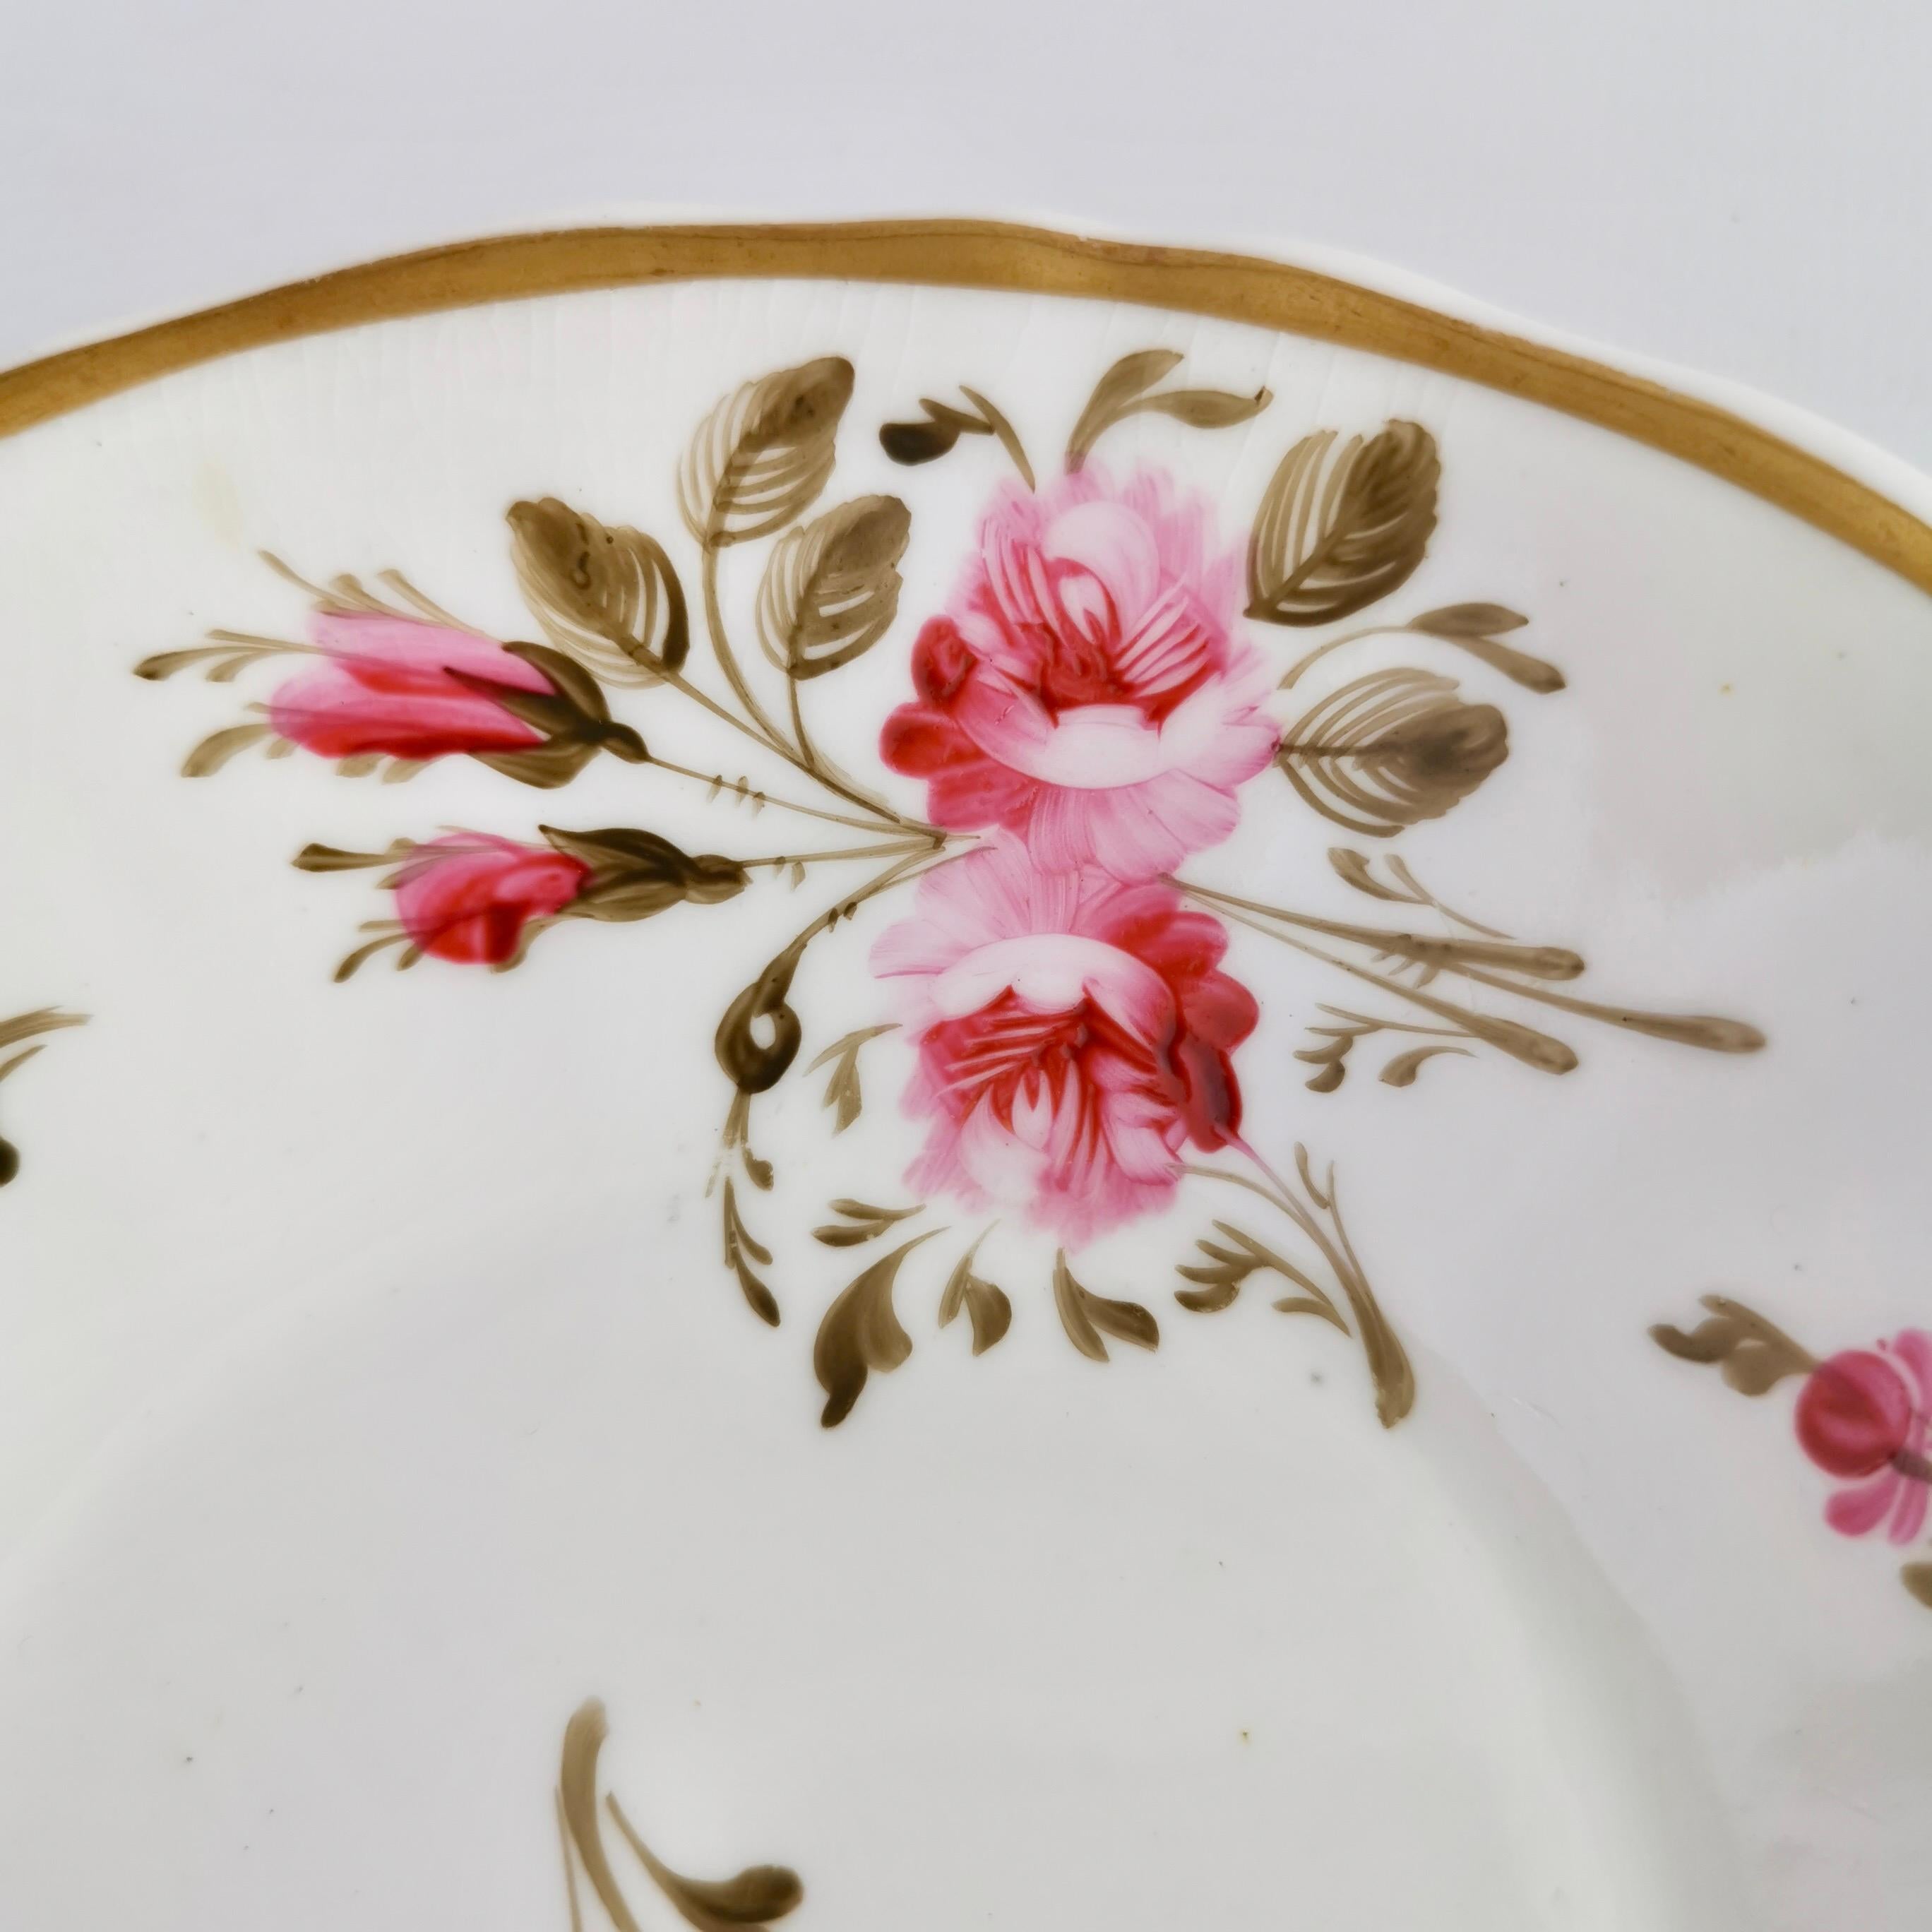 Early 19th Century Ridgway Porcelain Coffee Cup, Pink Roses on White, Regency ca 1825